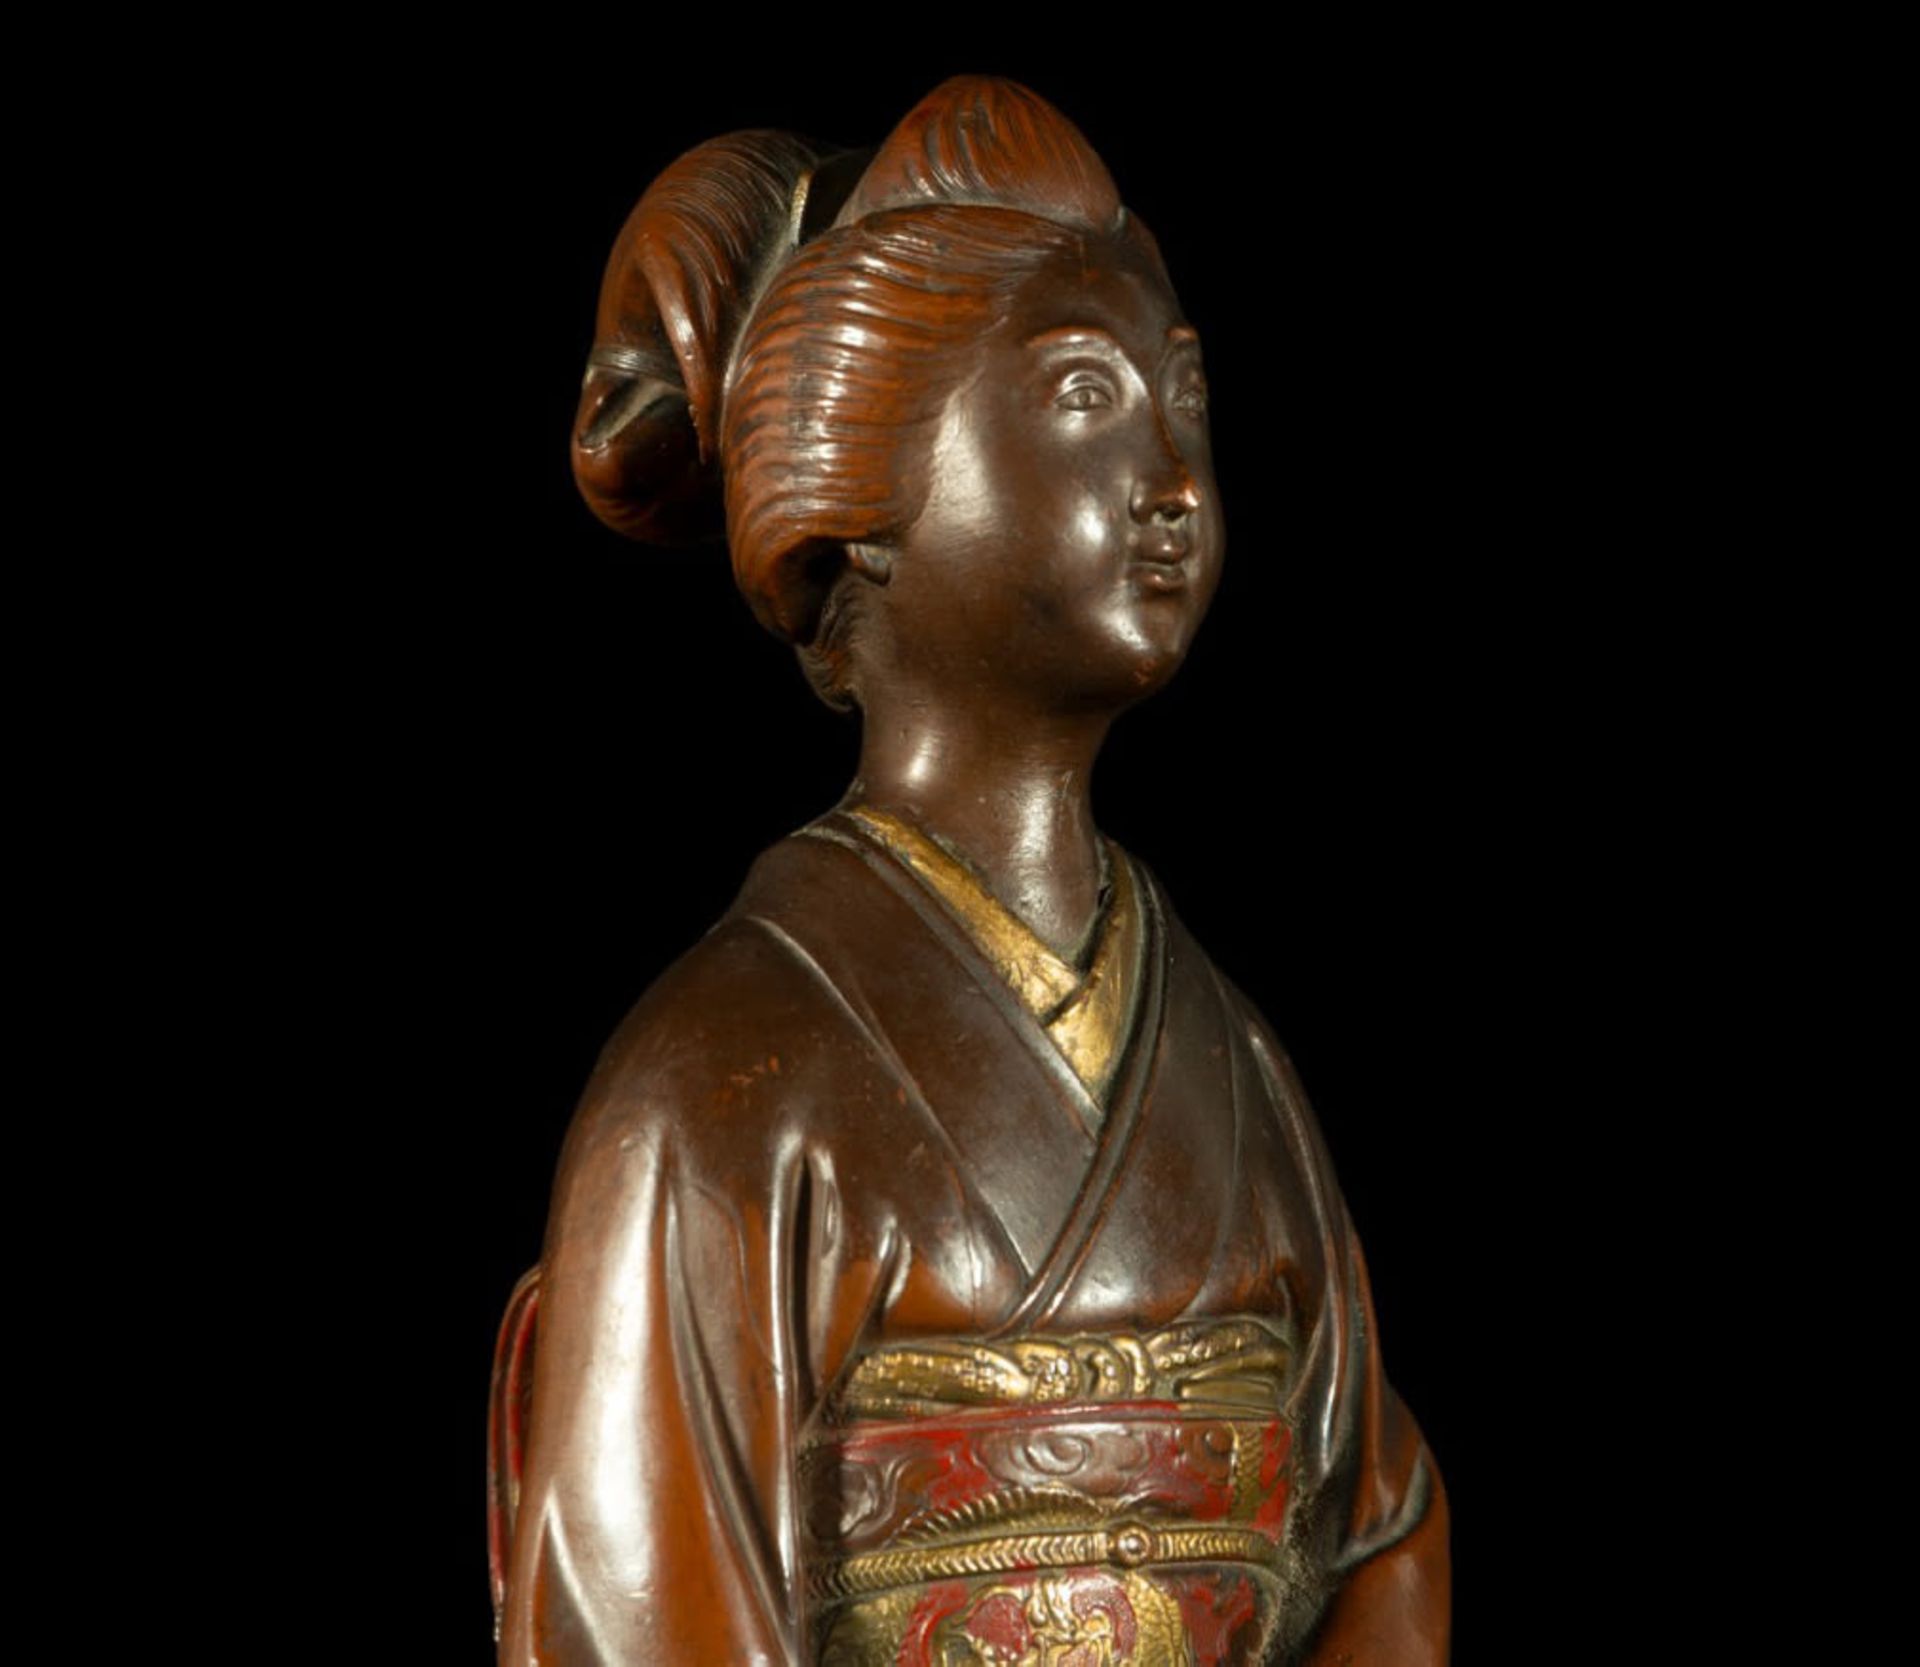 Exquisite Japanese Meiji Geisha in carved and gold-gilt "repoussé" copper, 19th century - Image 5 of 7